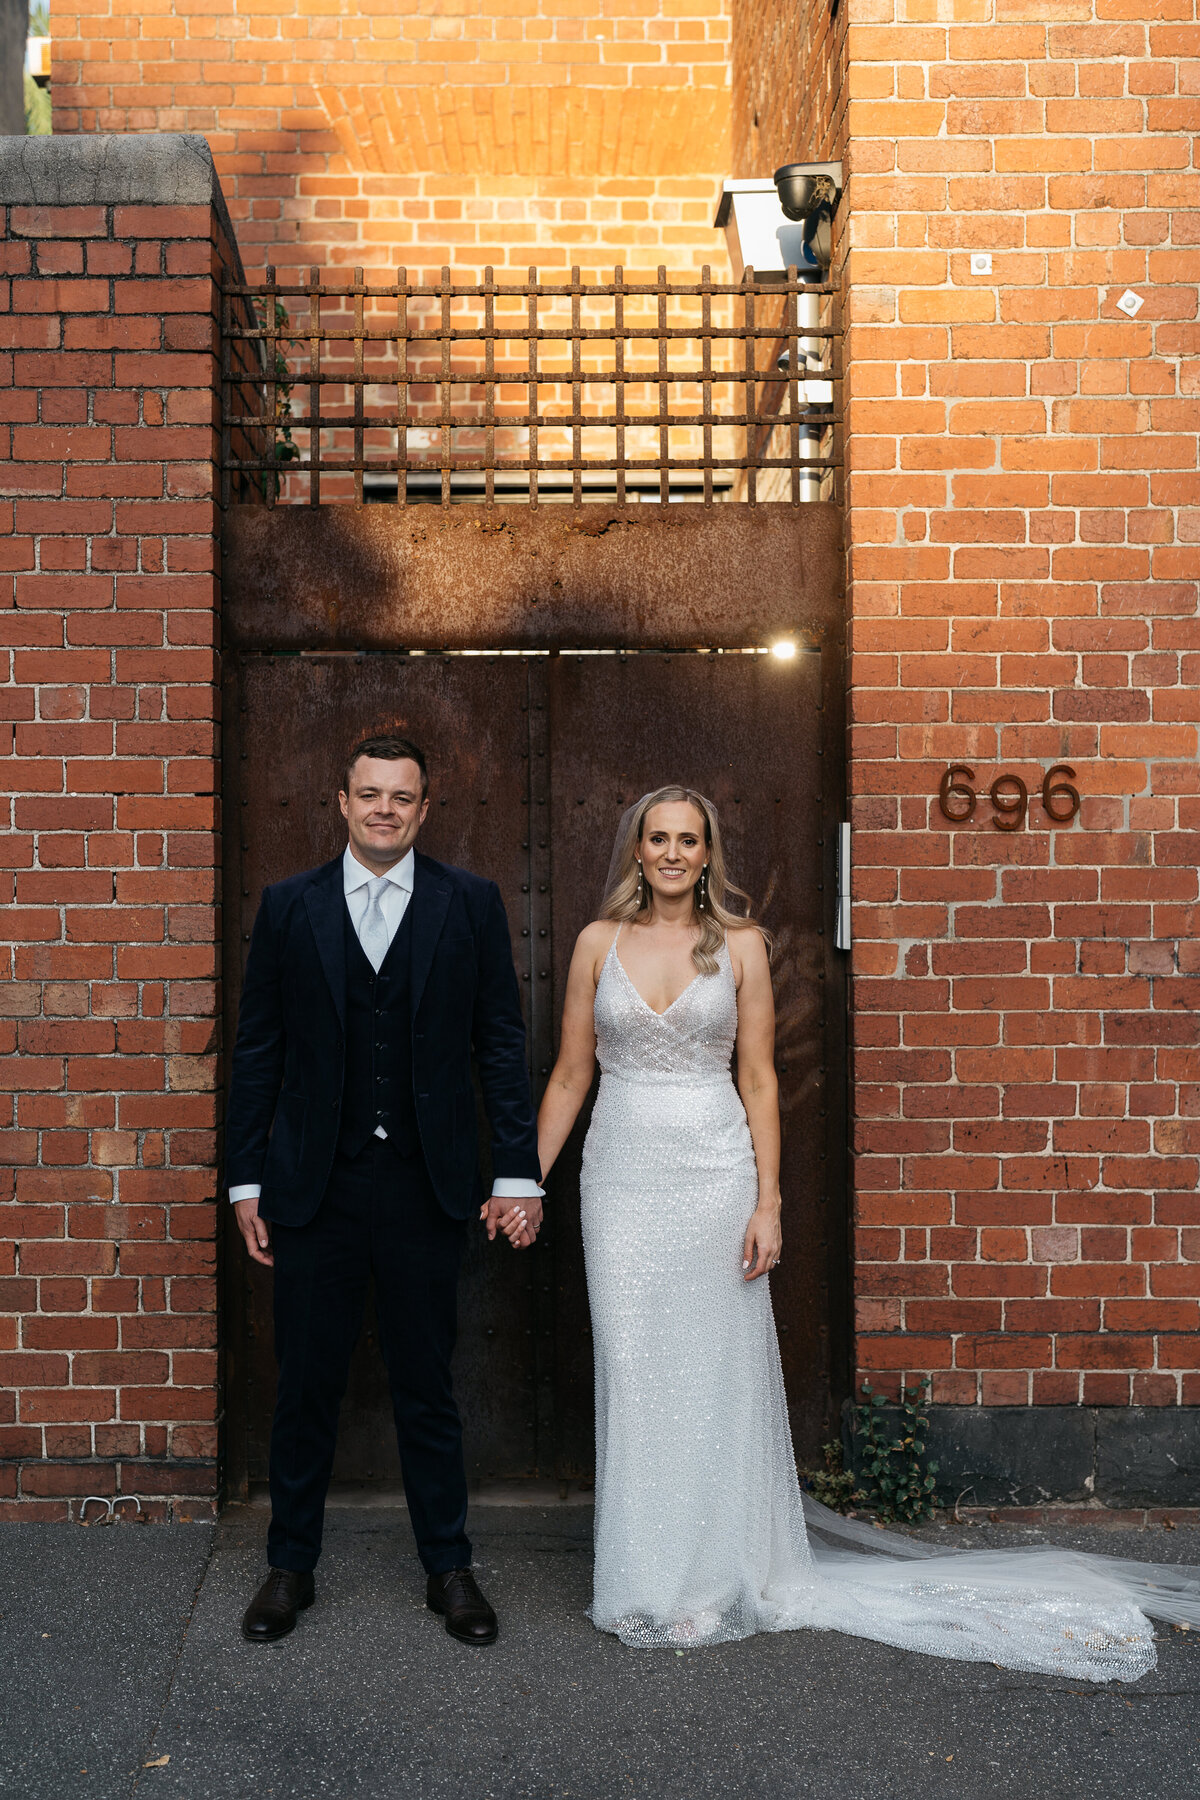 Courtney Laura Photography, Melbourne Wedding Photographer, Fitzroy Nth, 75 Reid St, Cath and Mitch-619